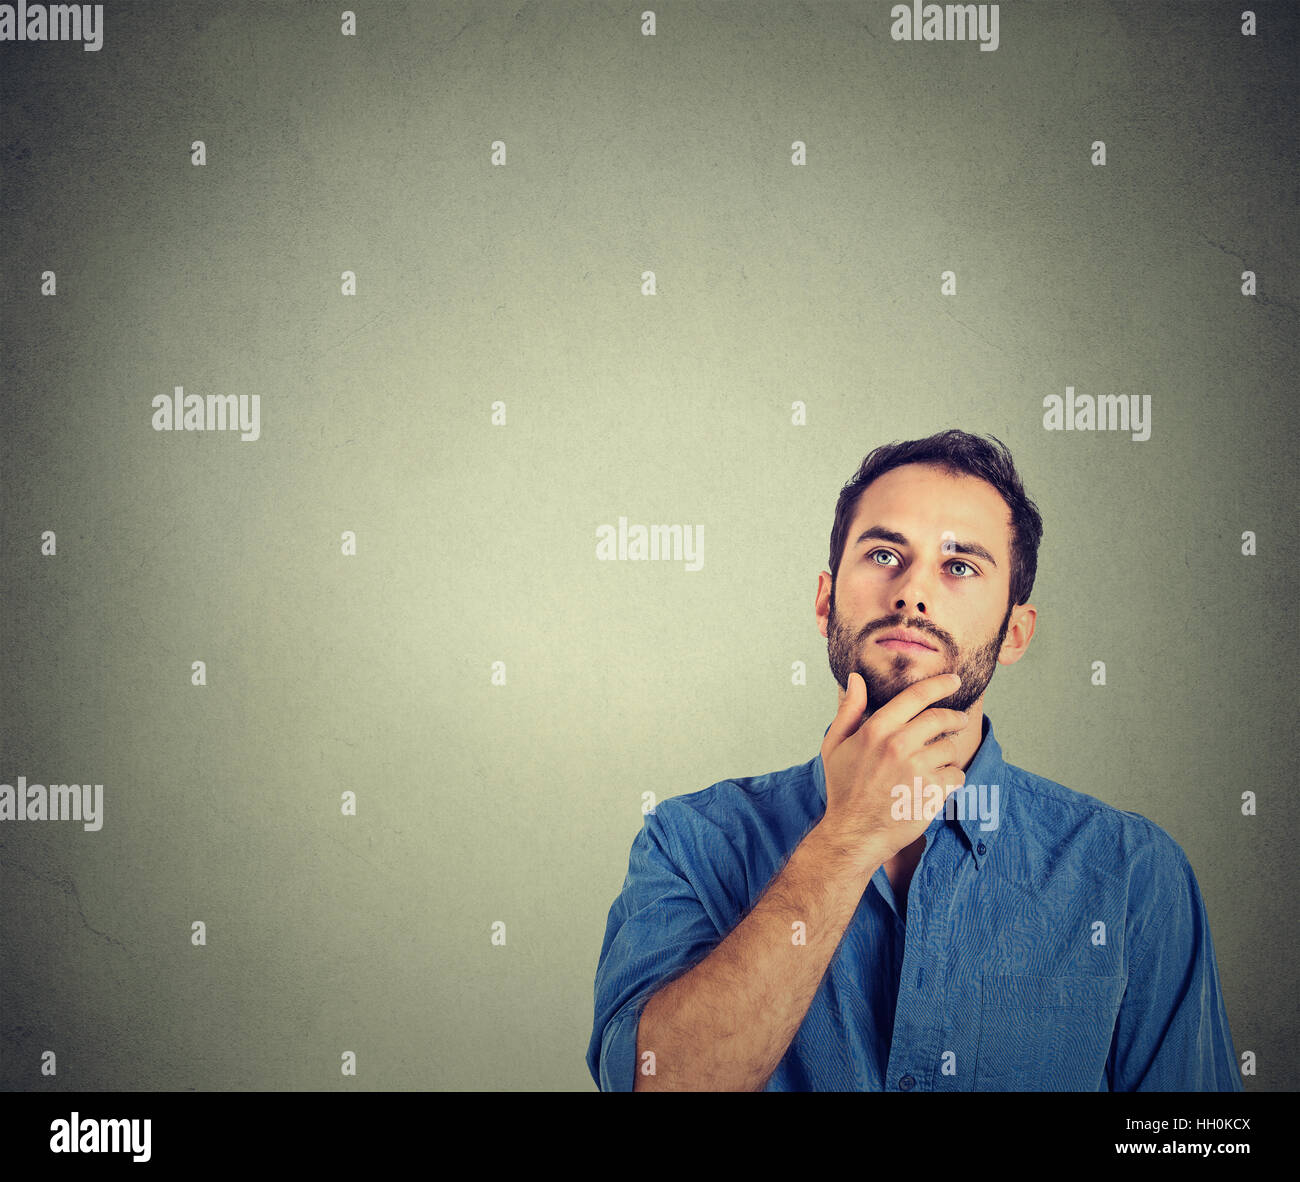 man thinking looking up isolated on gray background with copy space. Human face expressions, emotions, feelings, perception Stock Photo